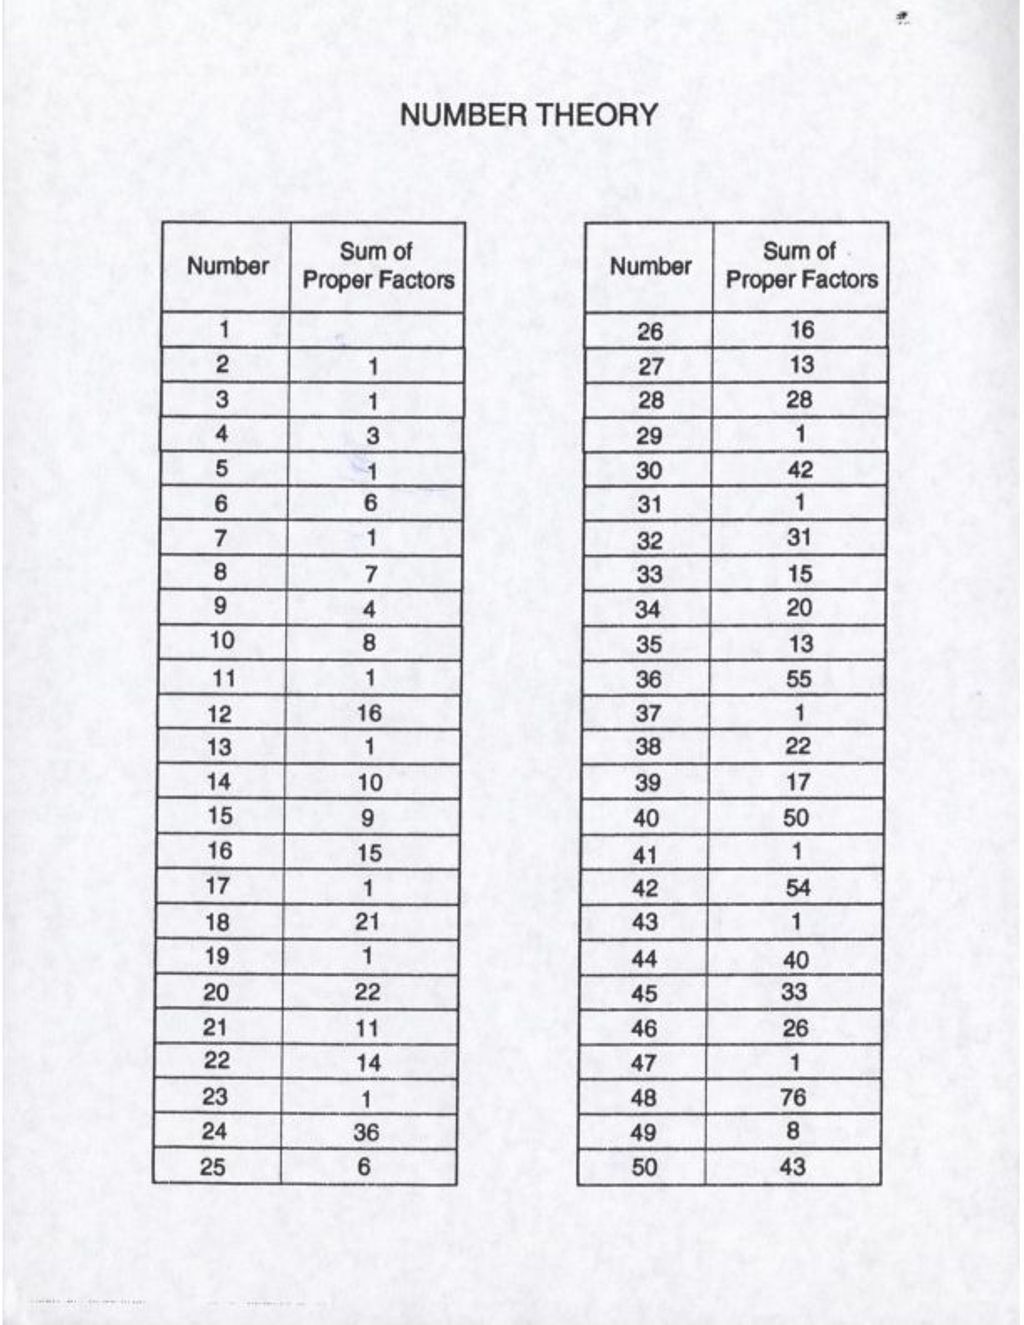 Miniature of Number Theory: Sum of Proper Factors Table